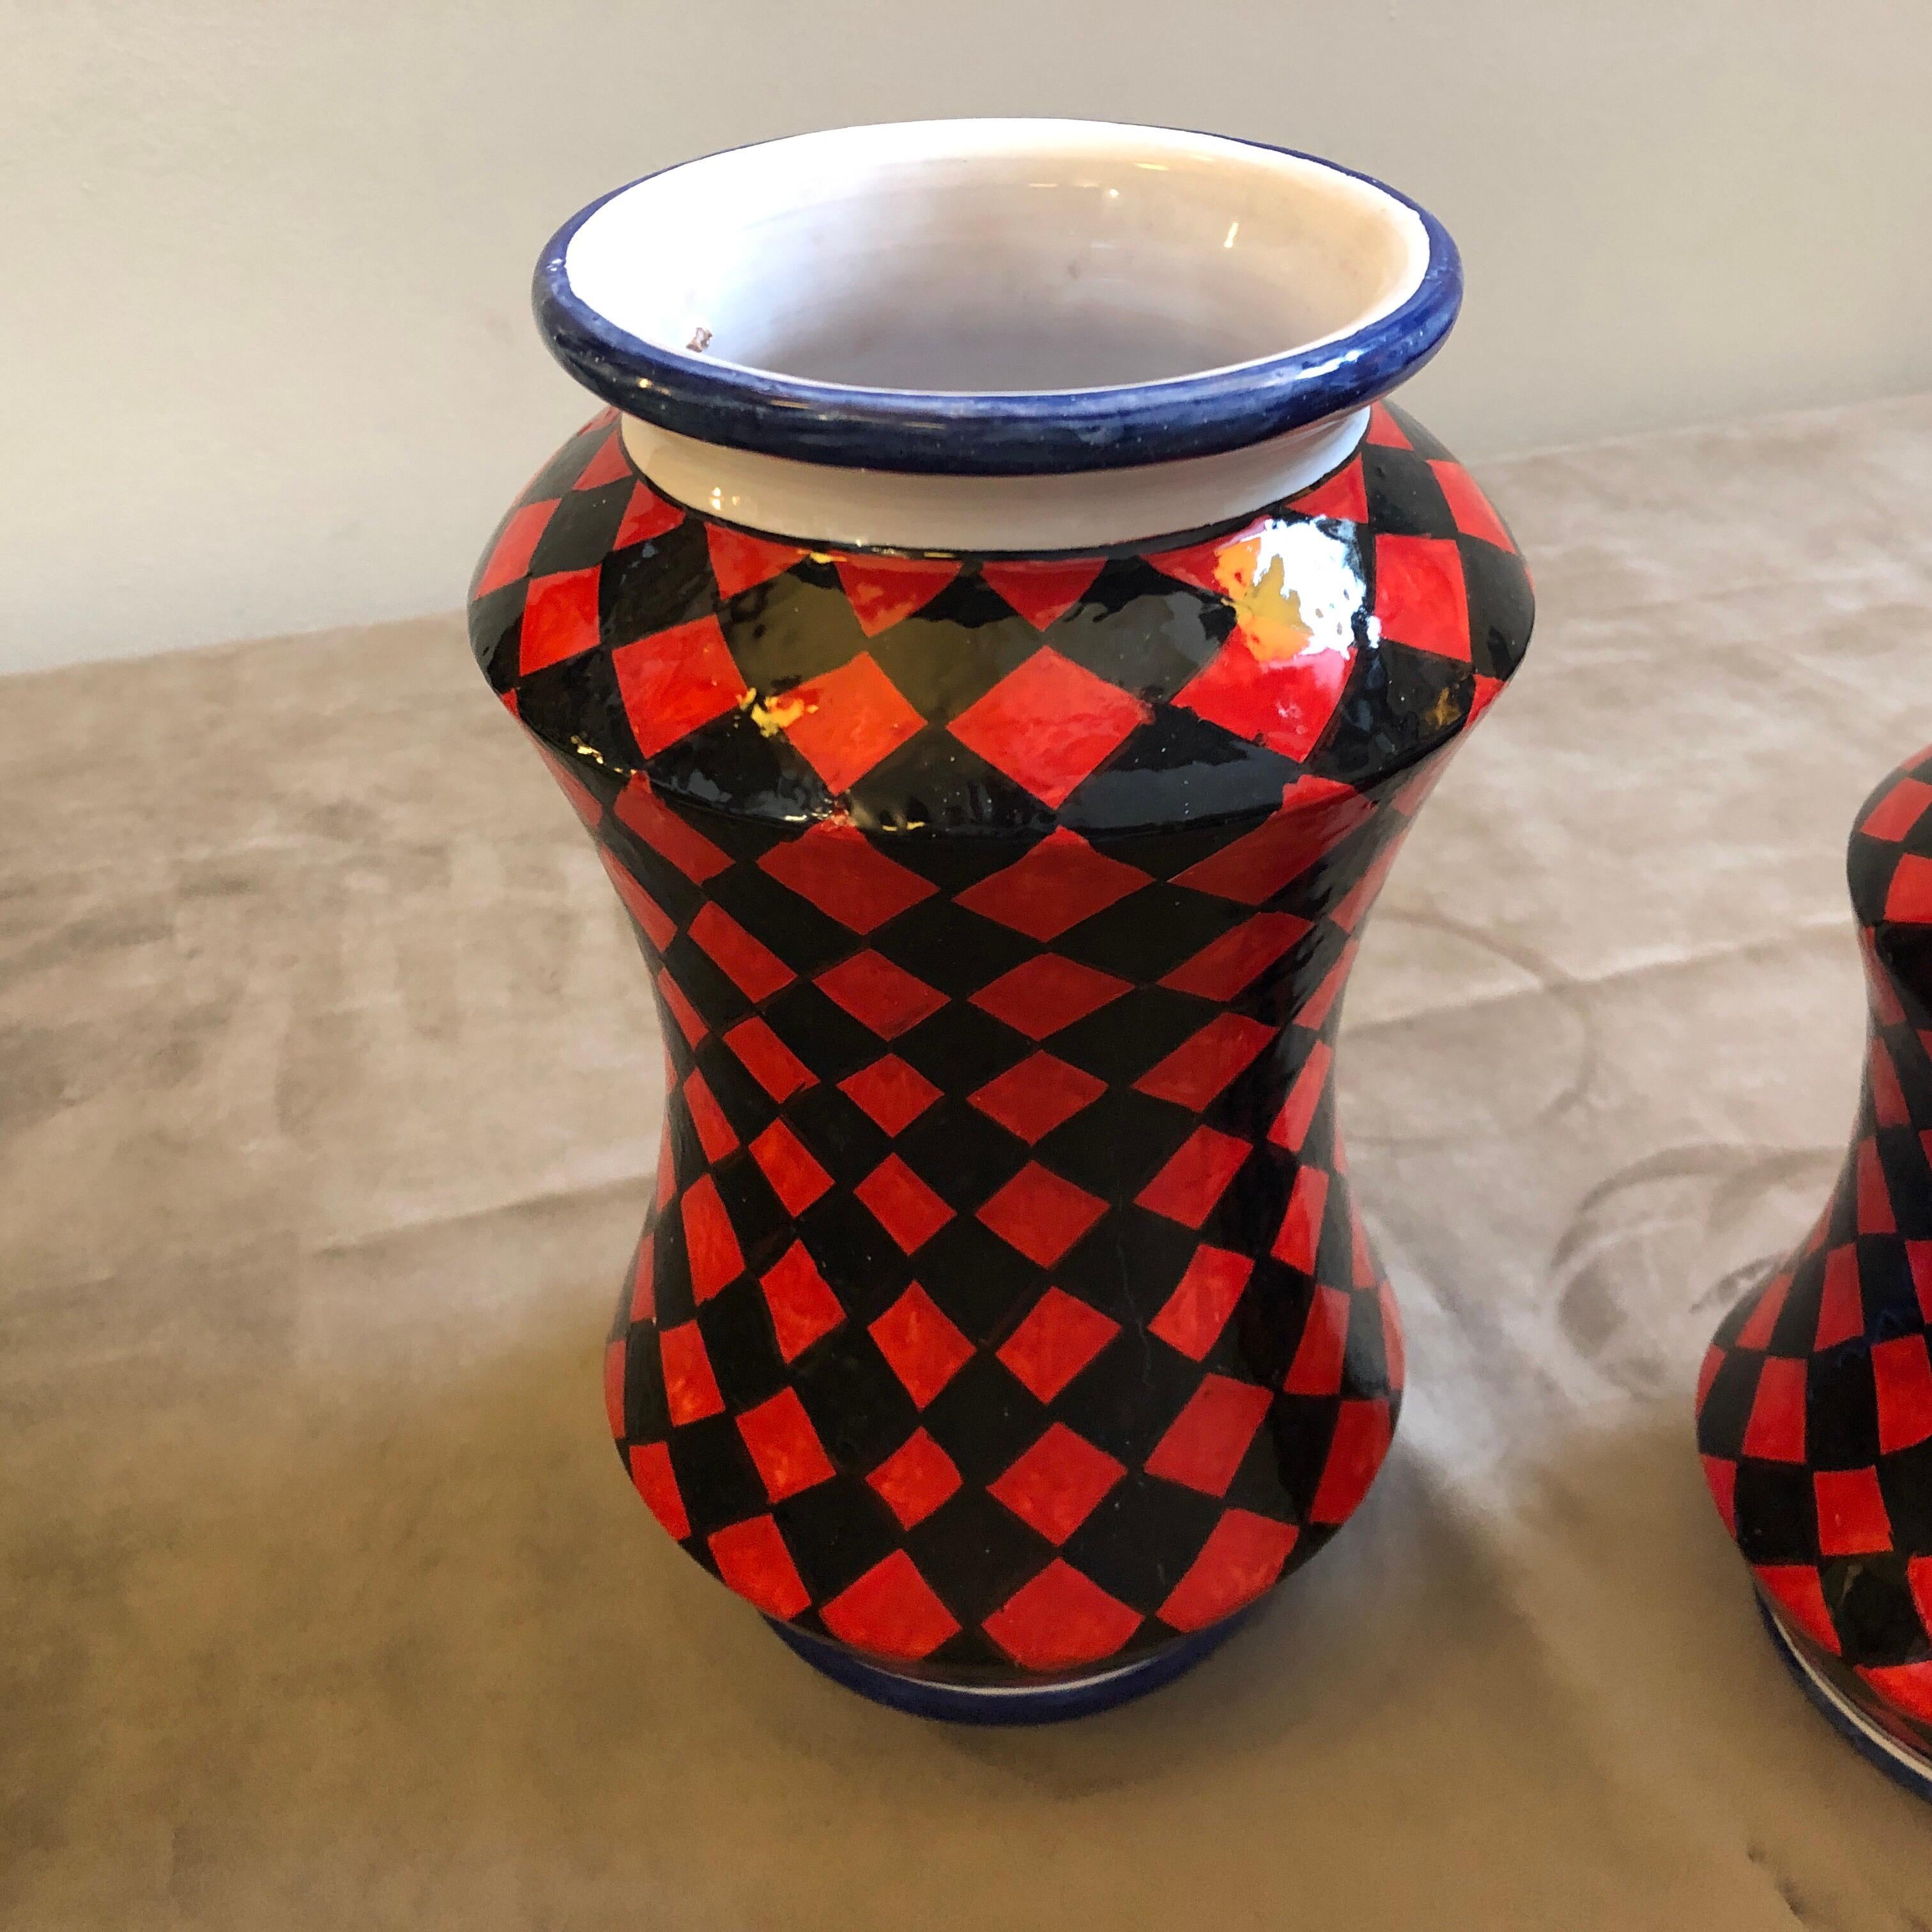 Three hand painted terracotta vases made in caltagirone, small town in Sicily famous for hand crafted ceramics, they are unique pieces especially made for our shop and signed on the bottom. In the past, the Albarello vase was made to contain medical